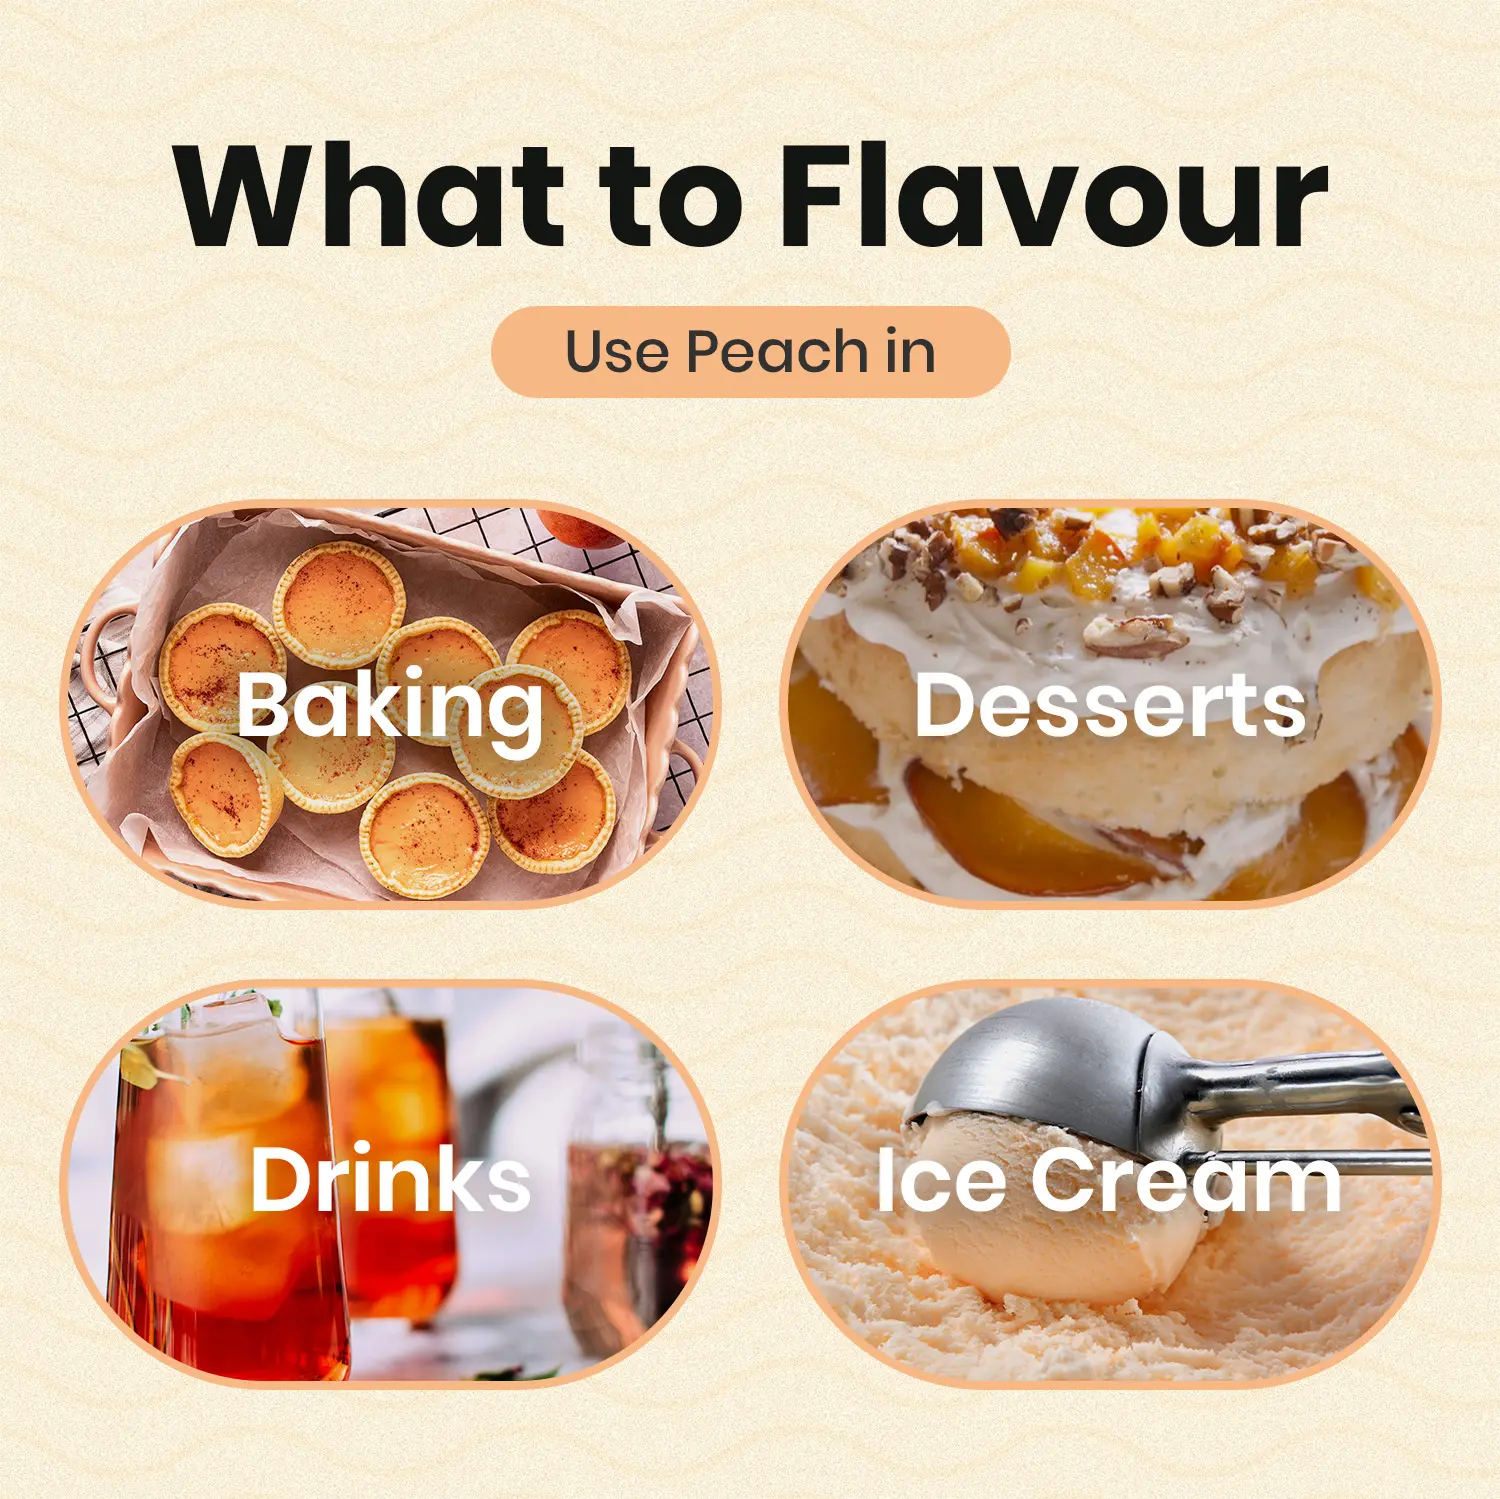 Peach Natural Flavouring - What to flavour